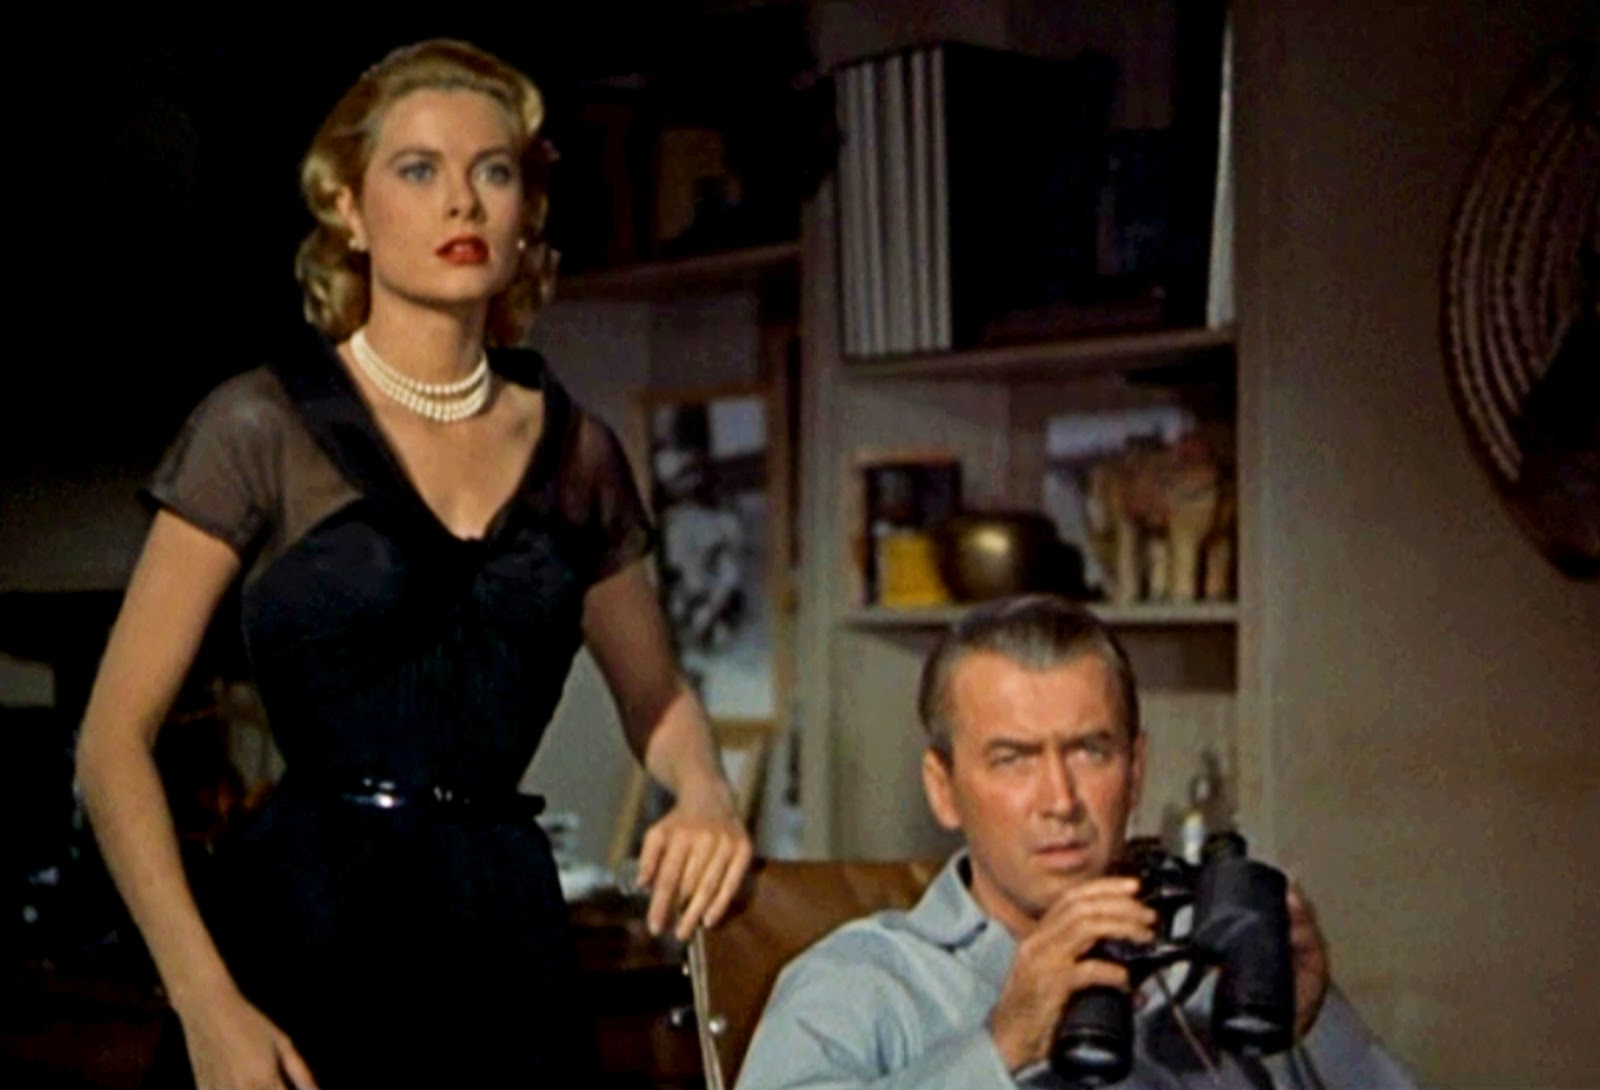 Hitchcock's Rear Window with Jimmy Stewart and Grace Kelly